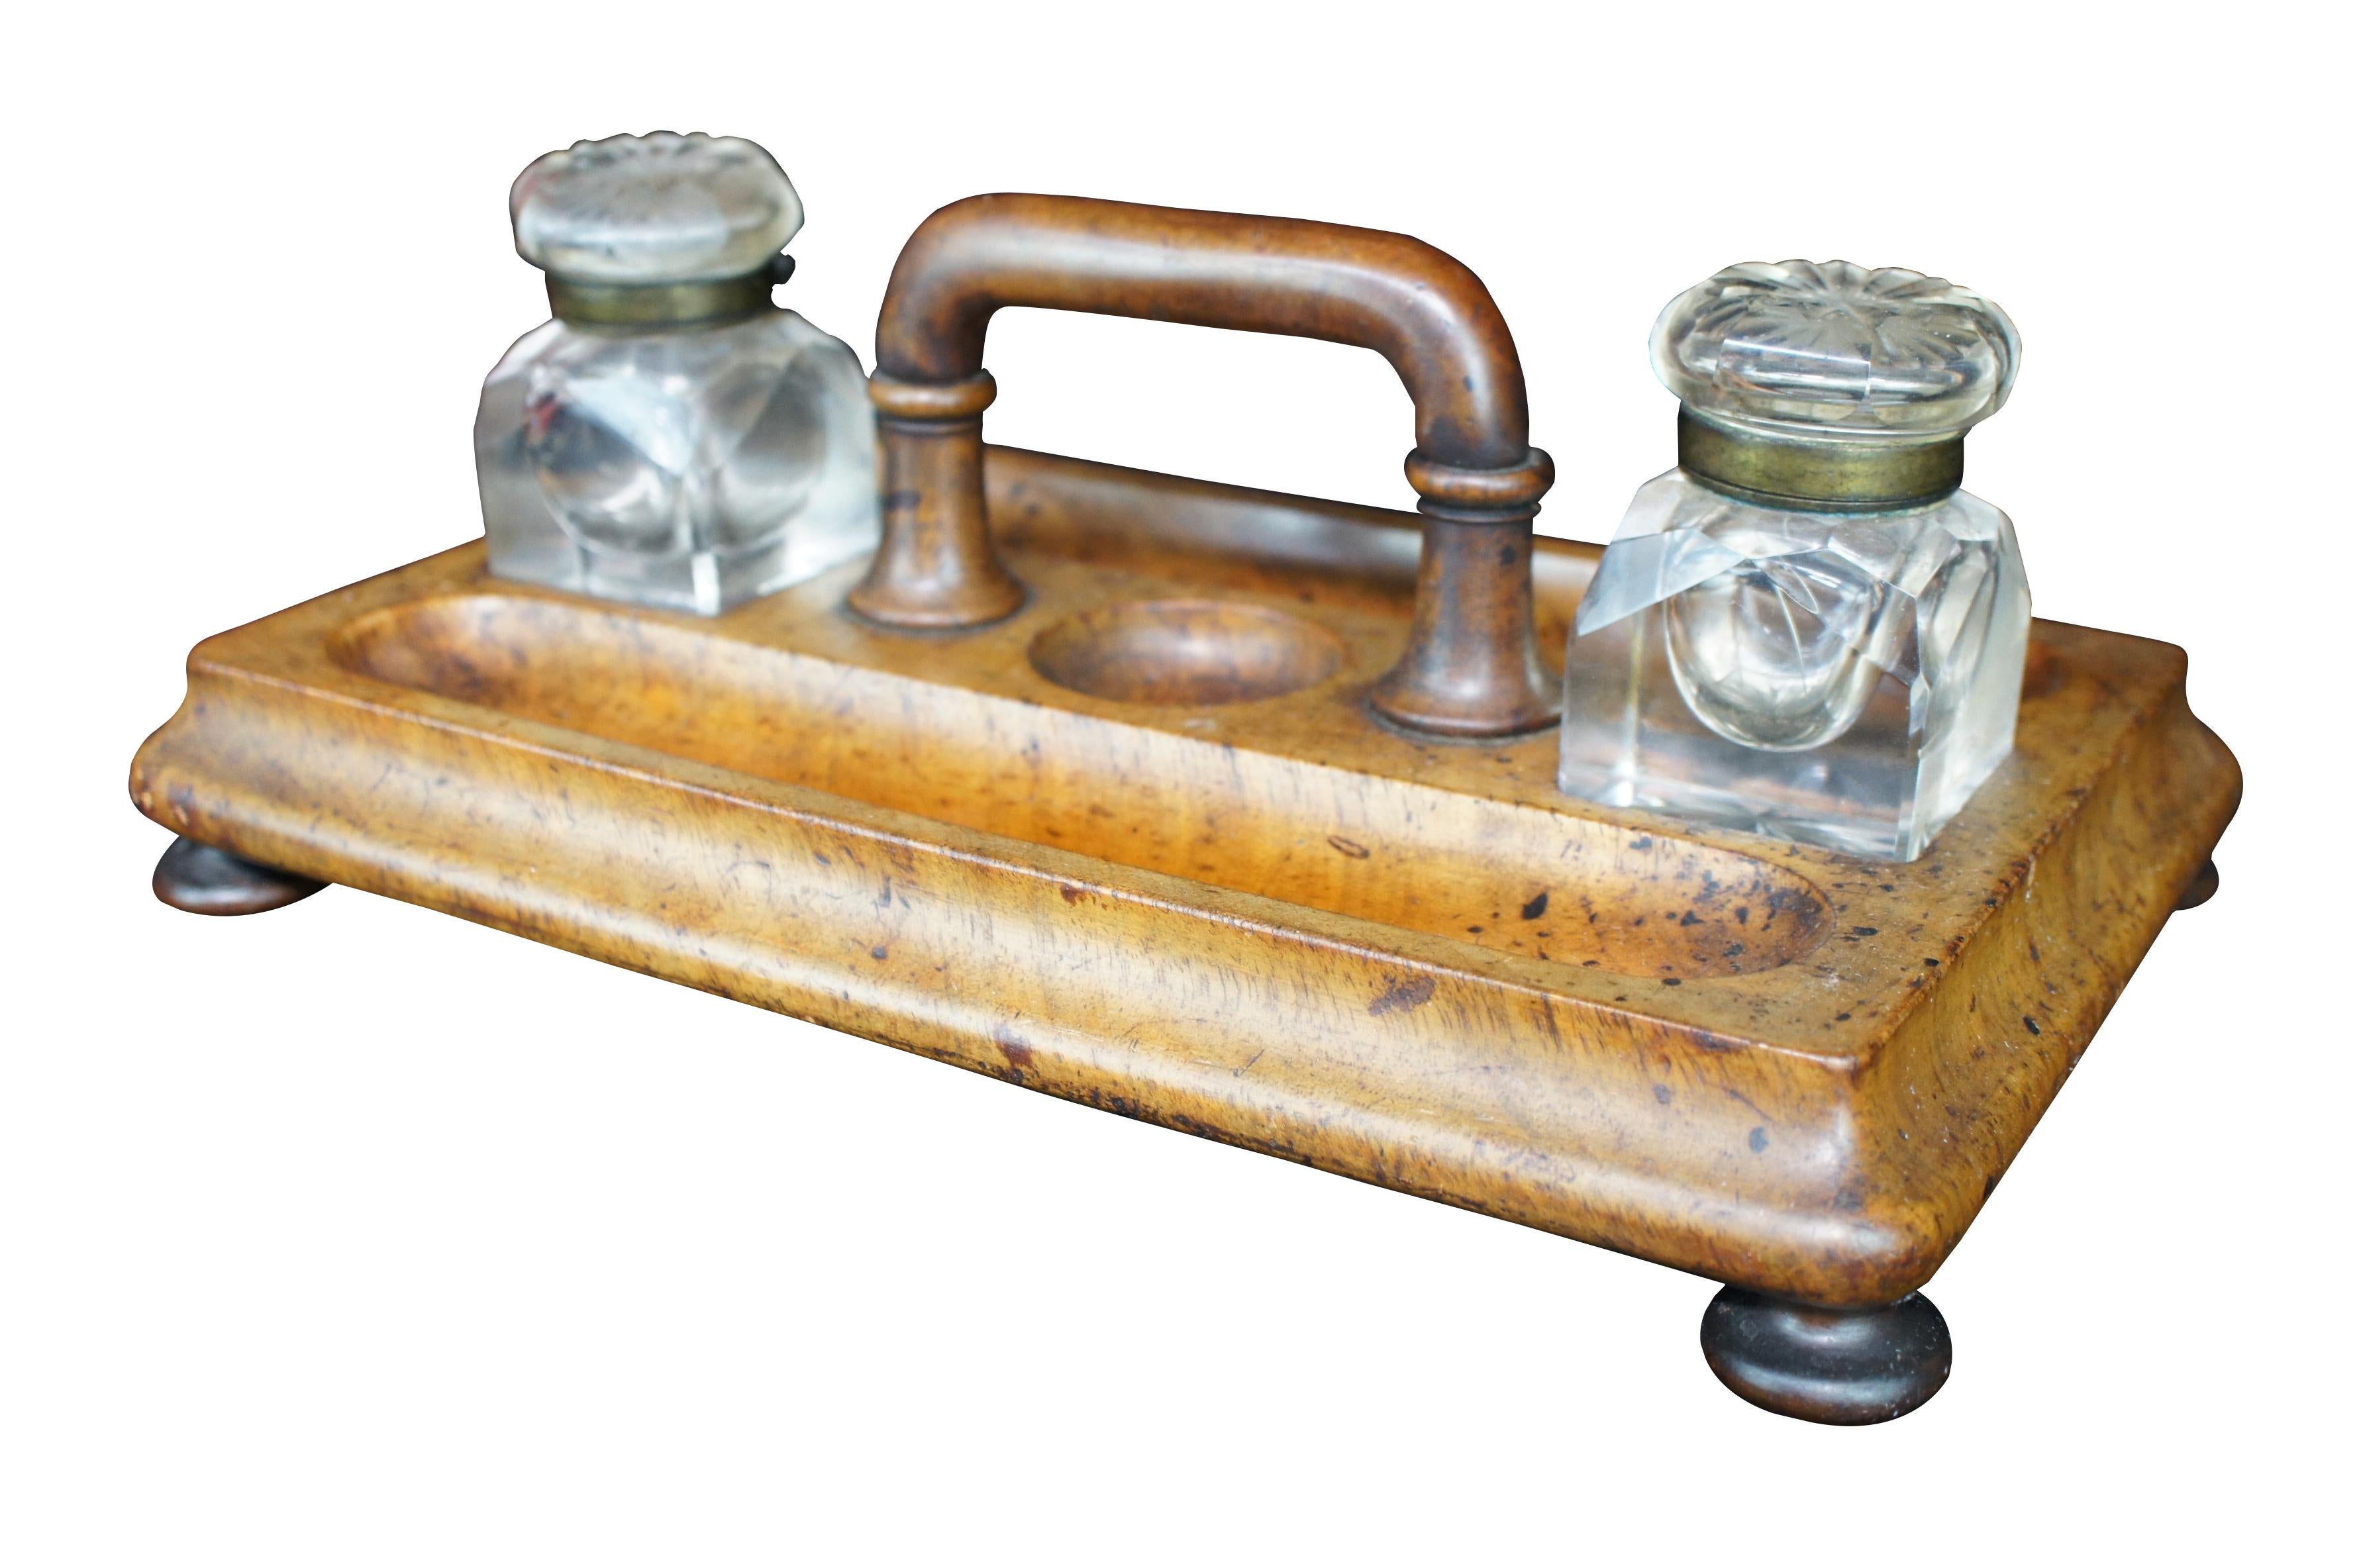 Early 20th century Edwardian Era Ink Stand. Made from walnut with a rectangular form and centrally located handle flanked by two crystal cut inkwells. The beautiful caddy is double sided with trough shaped molded pen holders. The stand is supported